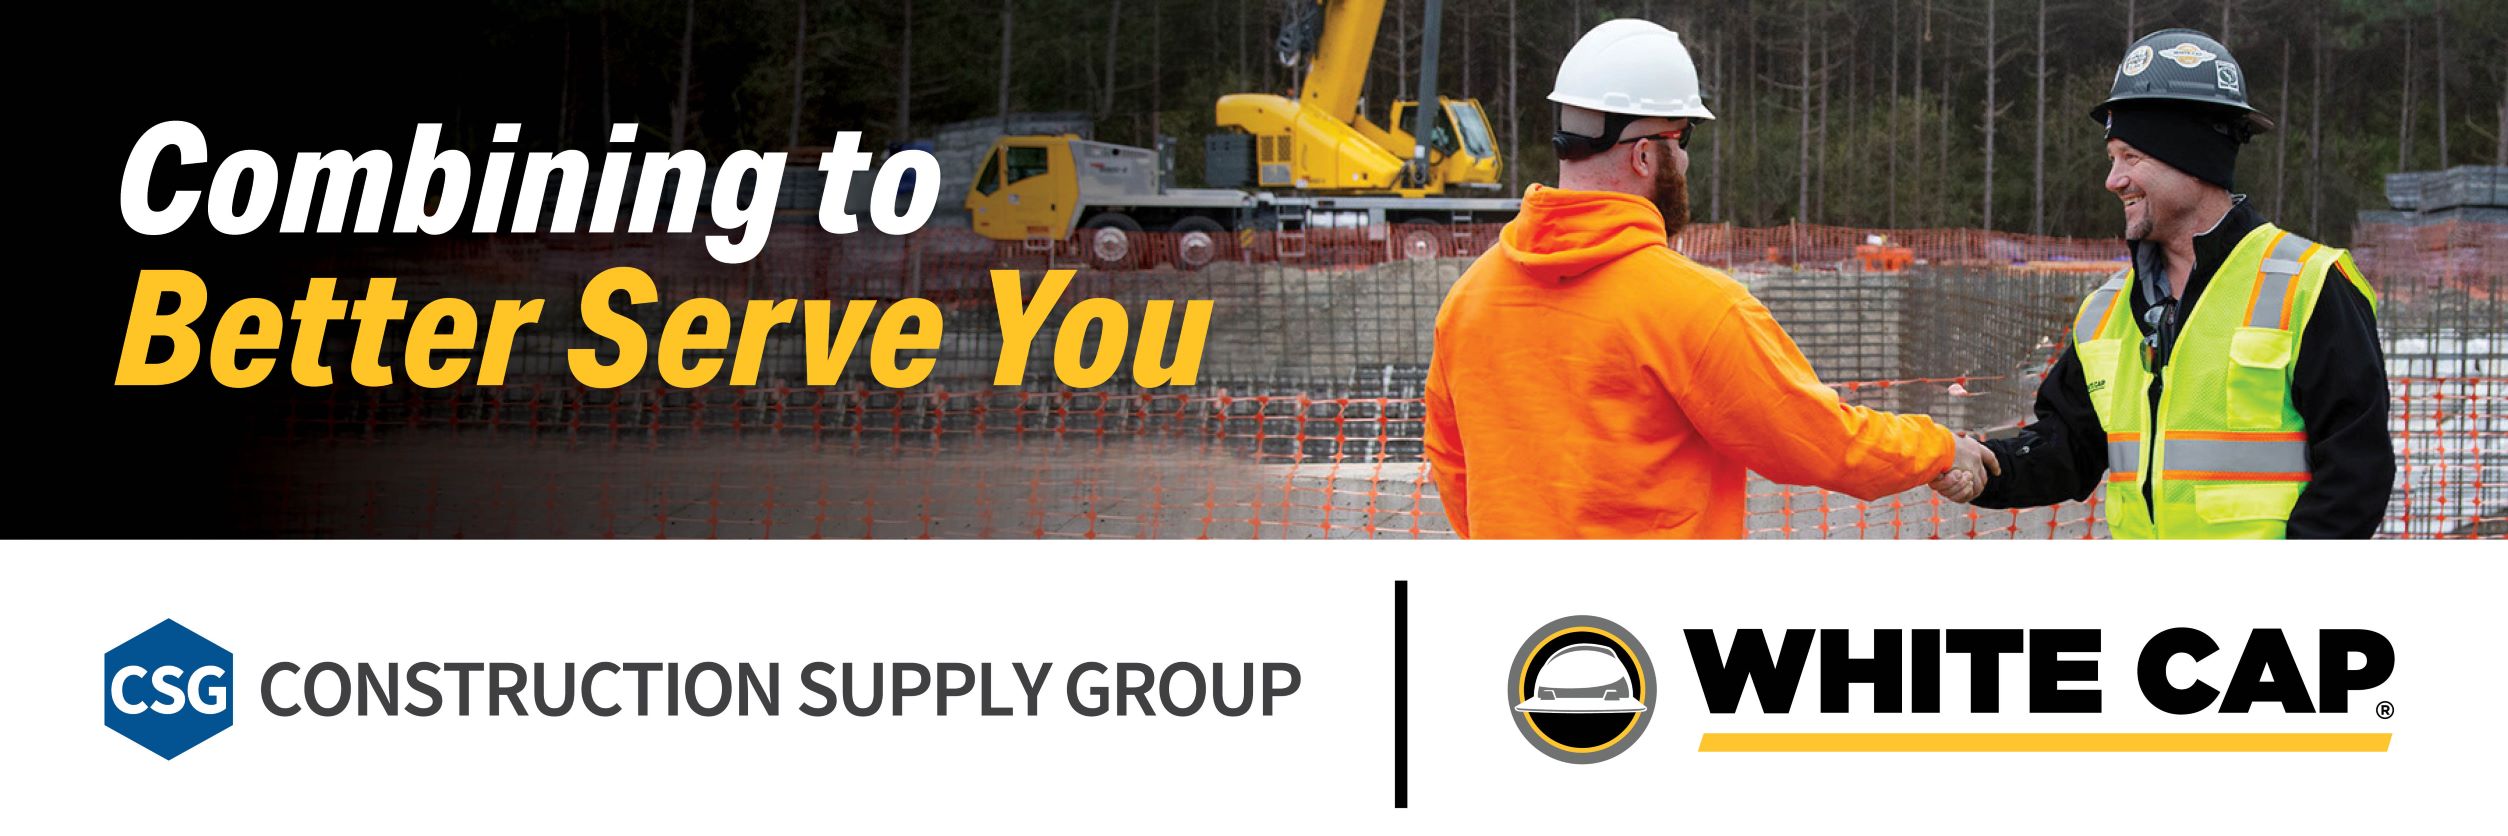 Construction Supply Group (CSG)